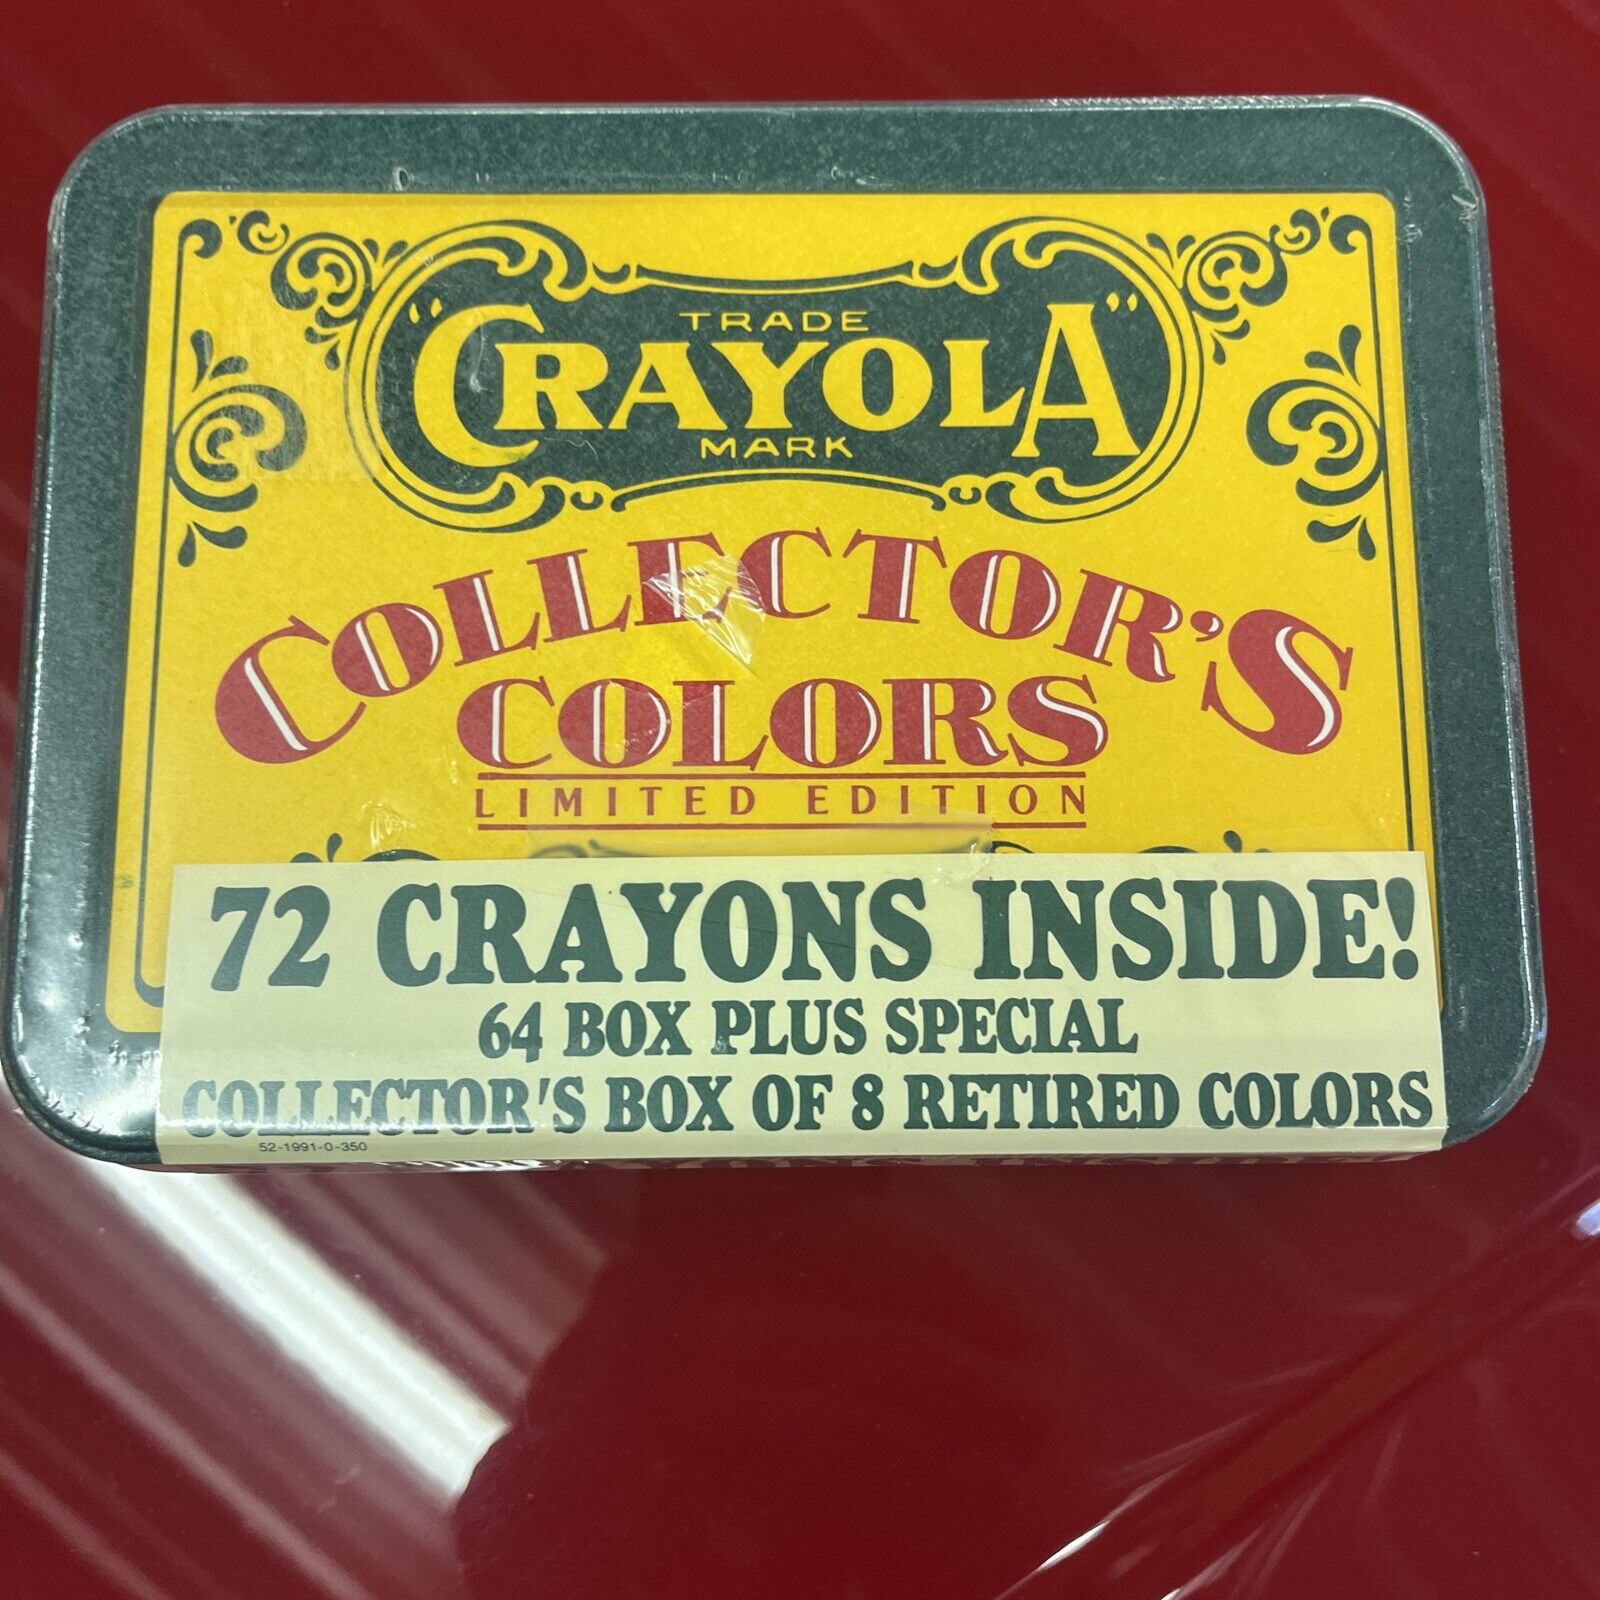 Crayola Collectors Colors Limited Edition, Tin w/ 72 Crayons - 1991 New In Wrap